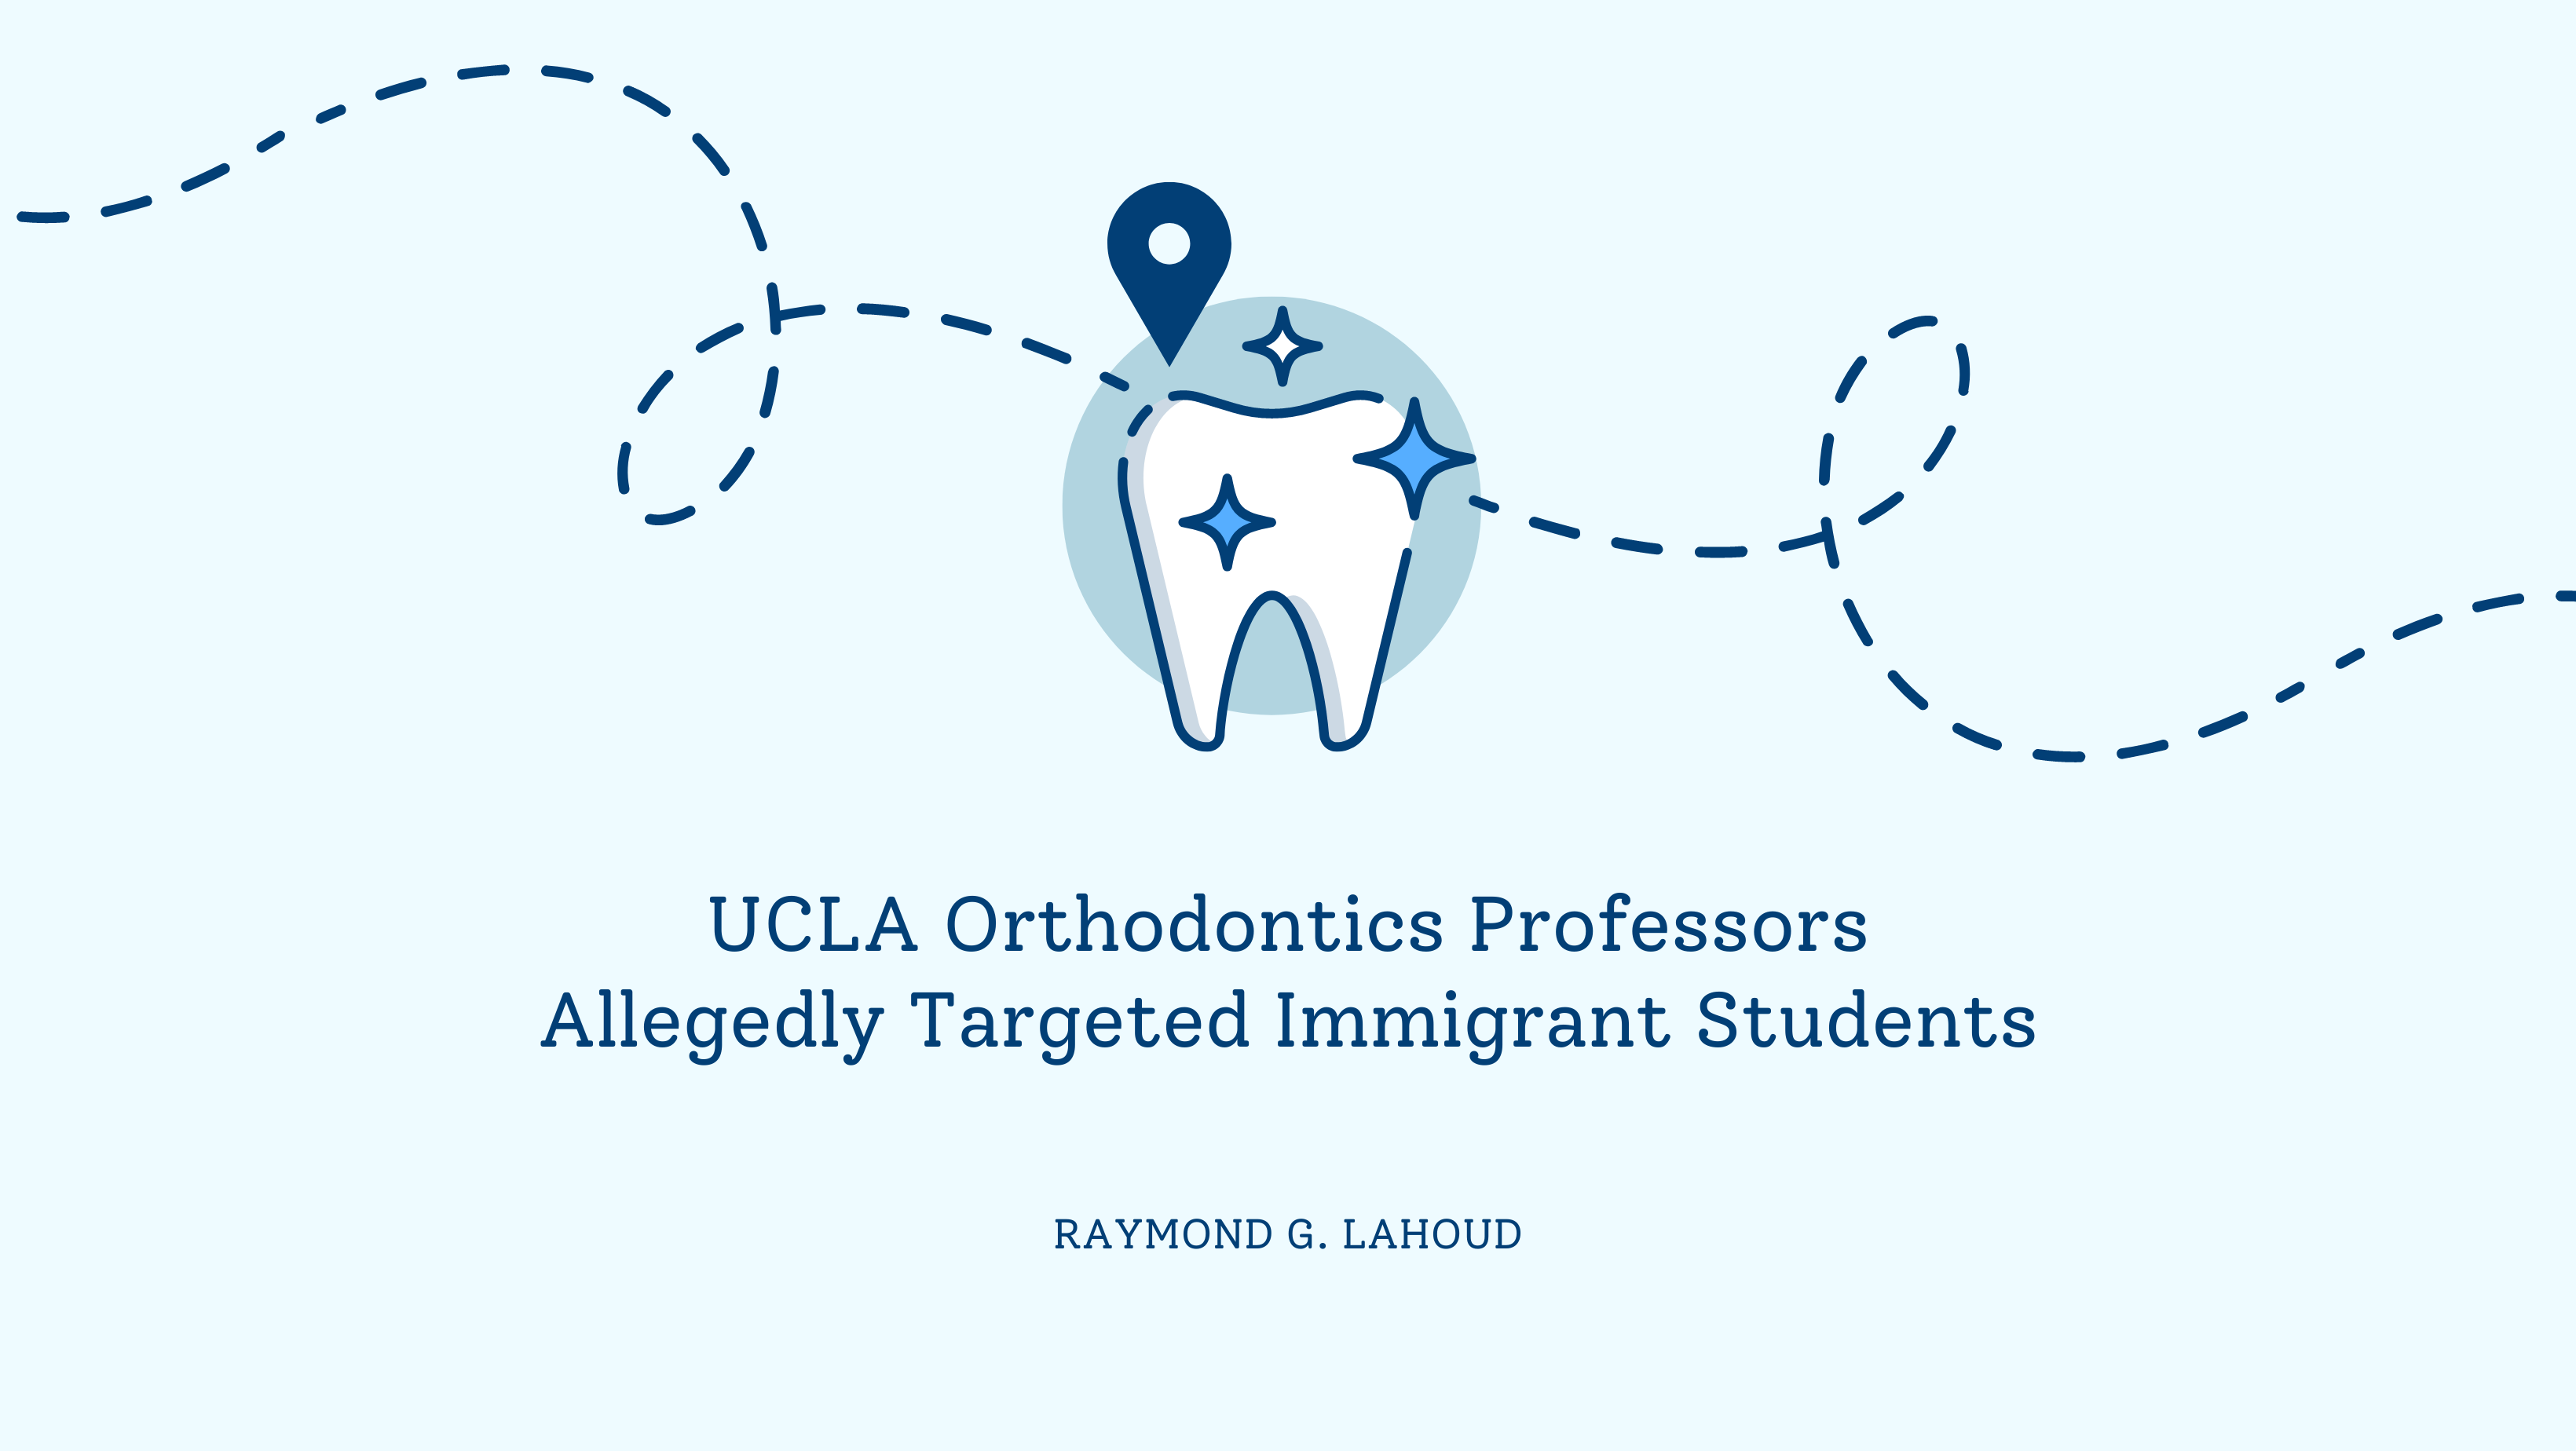 UCLA Orthodontics Professors Allegedly Targeted Immigrant Students